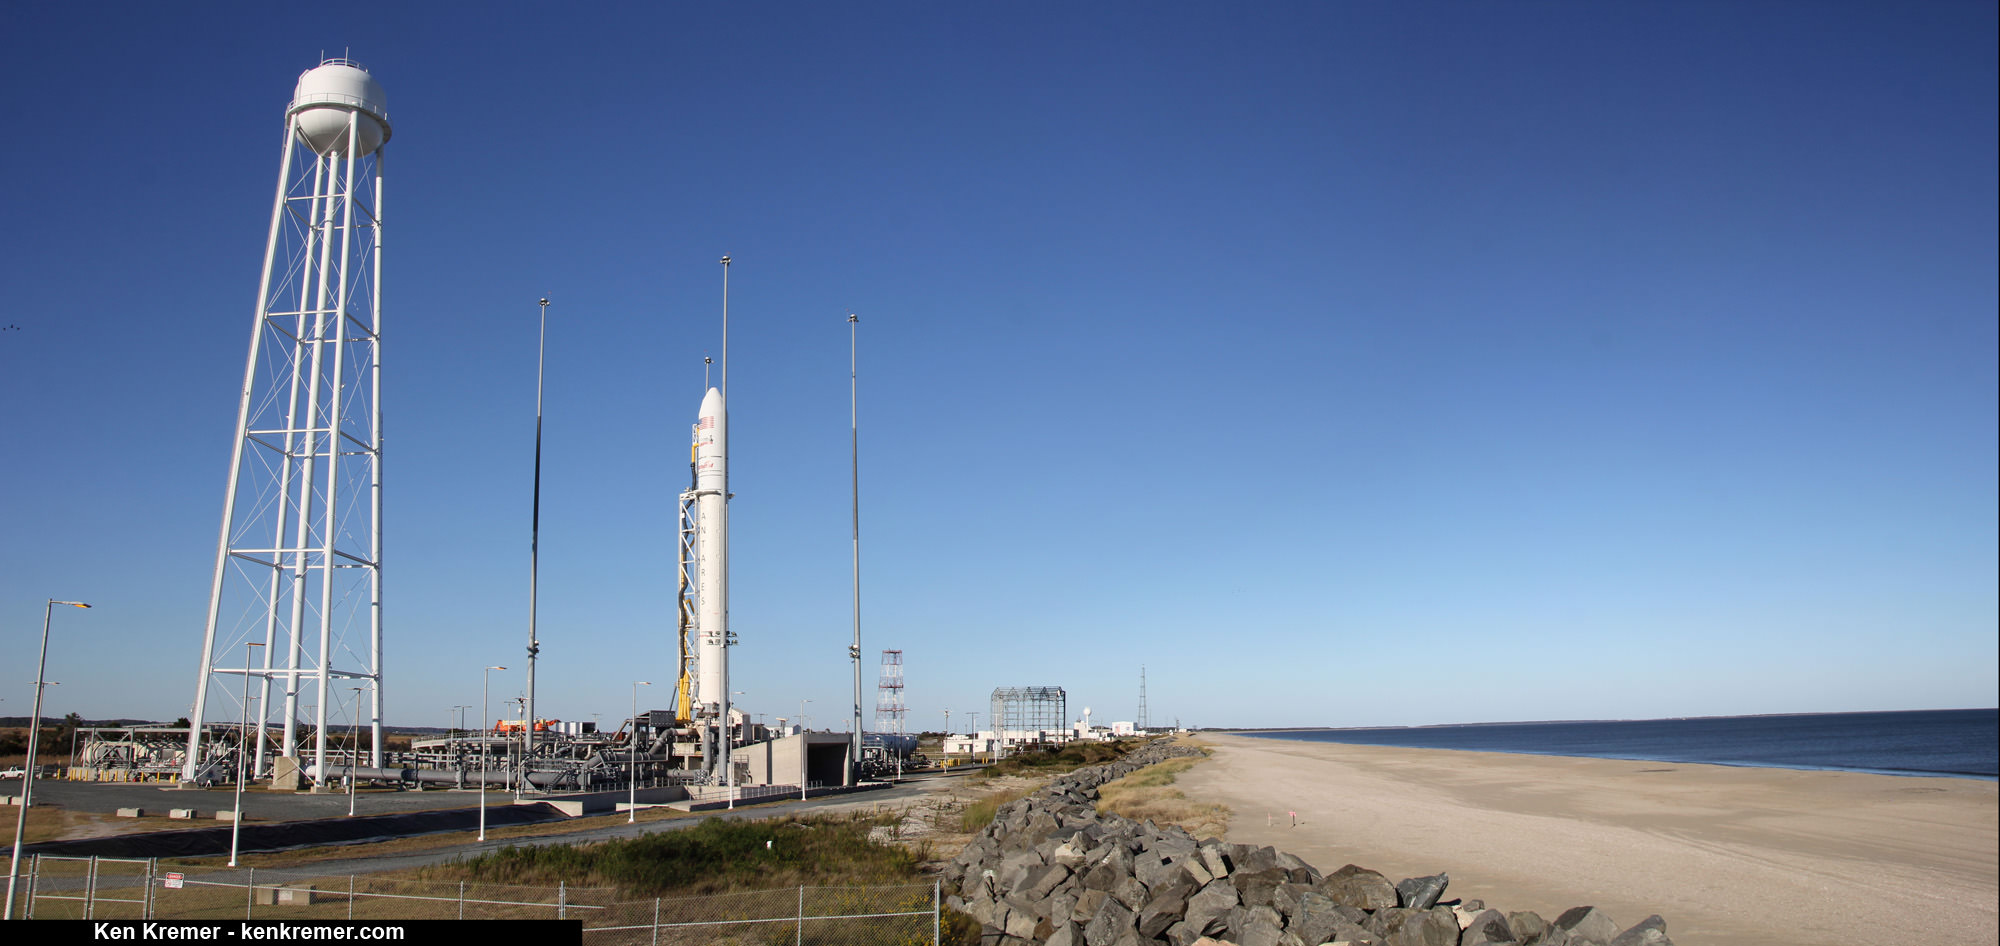 Pre-launch seaside panorama of Orbital Sciences Corporation Antares rocket at the NASA's Wallops Flight Facility launch pad on Oct 26 - 2 days before the Orb-3 launch failure on Oct 28, 2014.  Credit: Ken Kremer - kenkremer.com